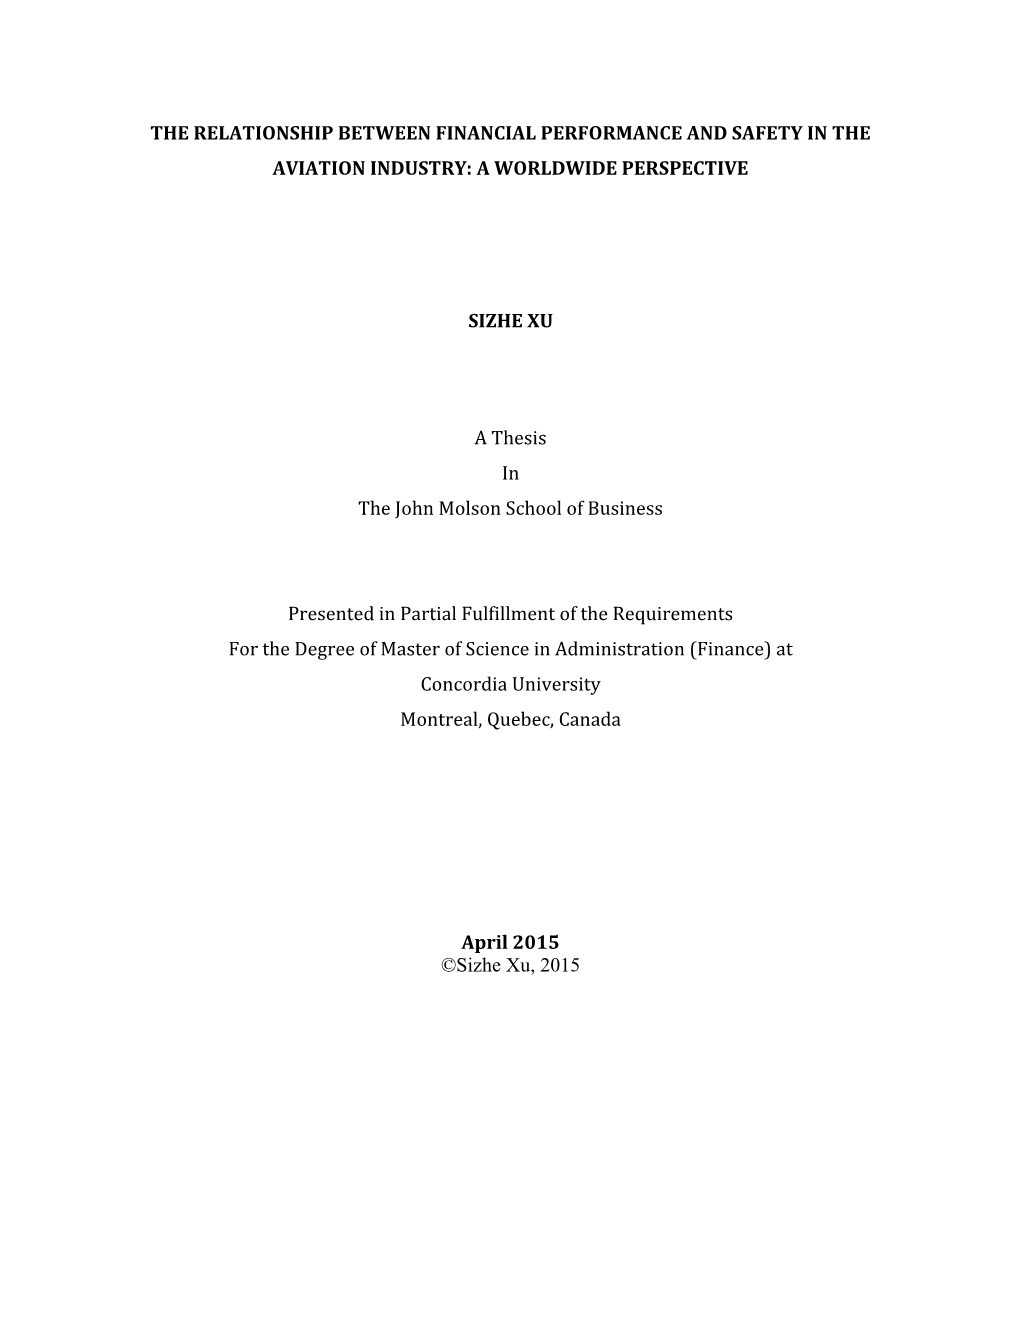 THE RELATIONSHIP BETWEEN FINANCIAL PERFORMANCE and SAFETY in the AVIATION INDUSTRY: a WORLDWIDE PERSPECTIVE SIZHE XU a Thesis In